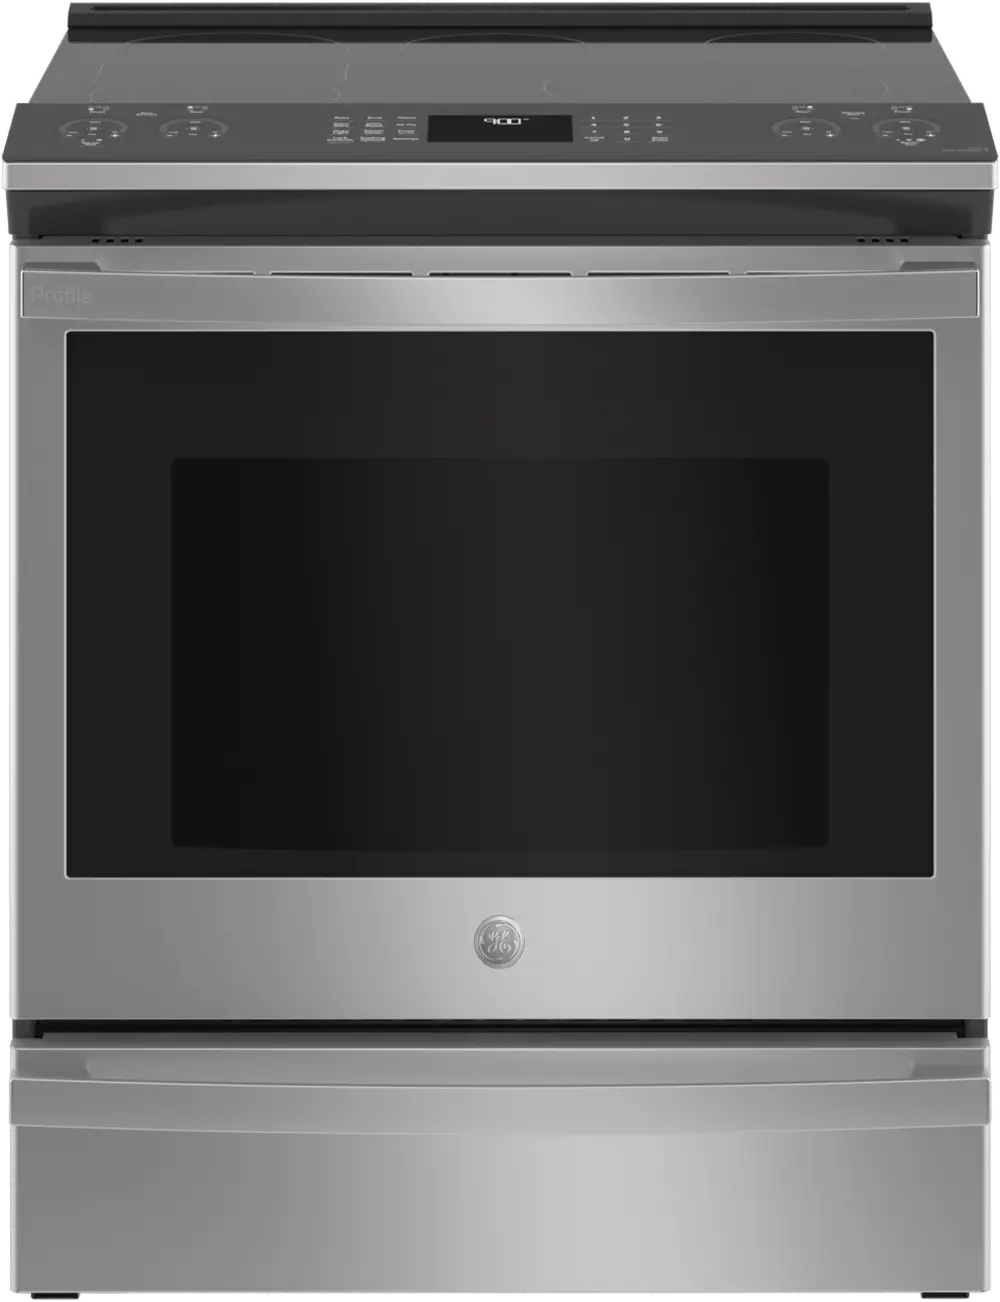 PSS93YPFS GE Profile 5.3 cu ft Electric Range - Stainless Steel-1